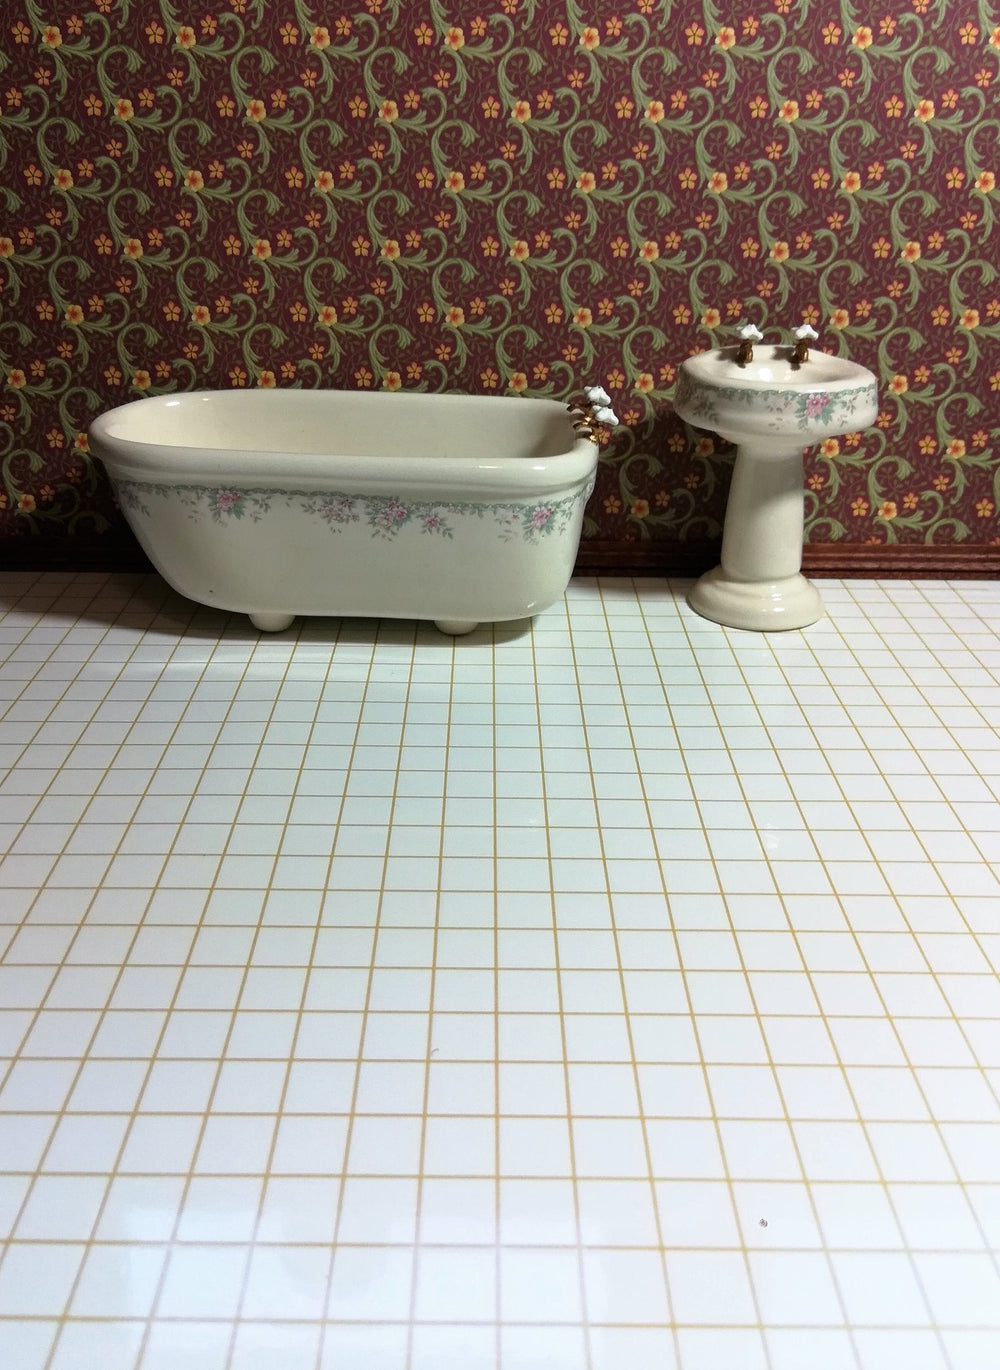 Dollhouse White Square Faux Tile Flooring Lightly Embossed 1:12 Scale for Kitchen or Bathroom - Miniature Crush